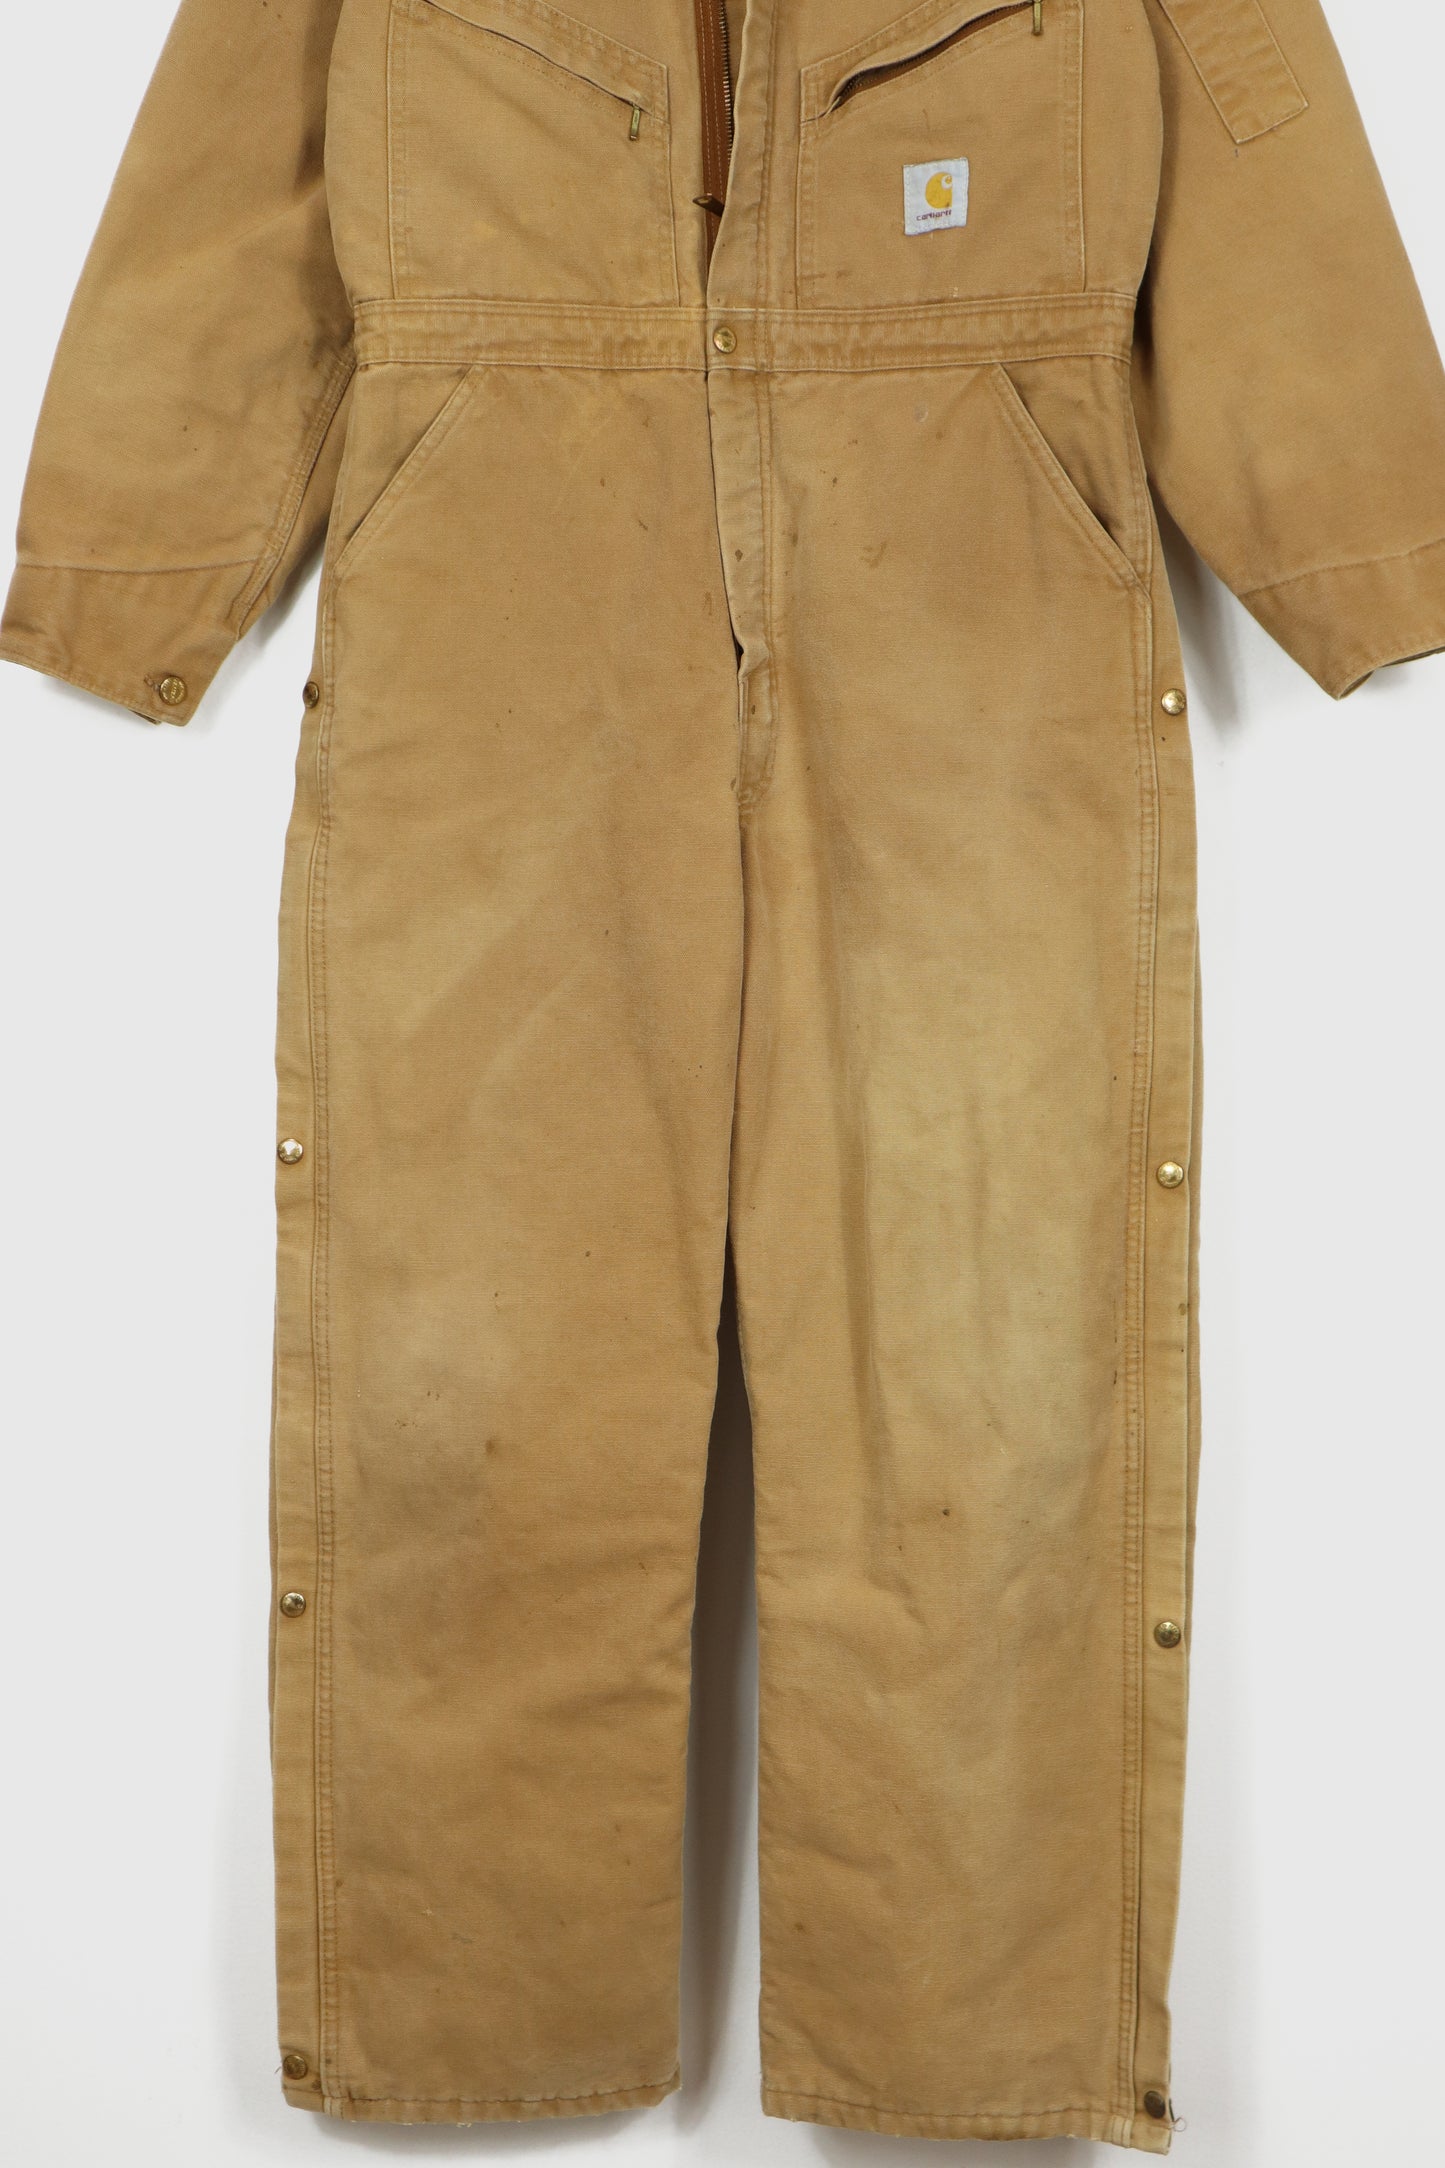 Vintage Carhartt Coverall